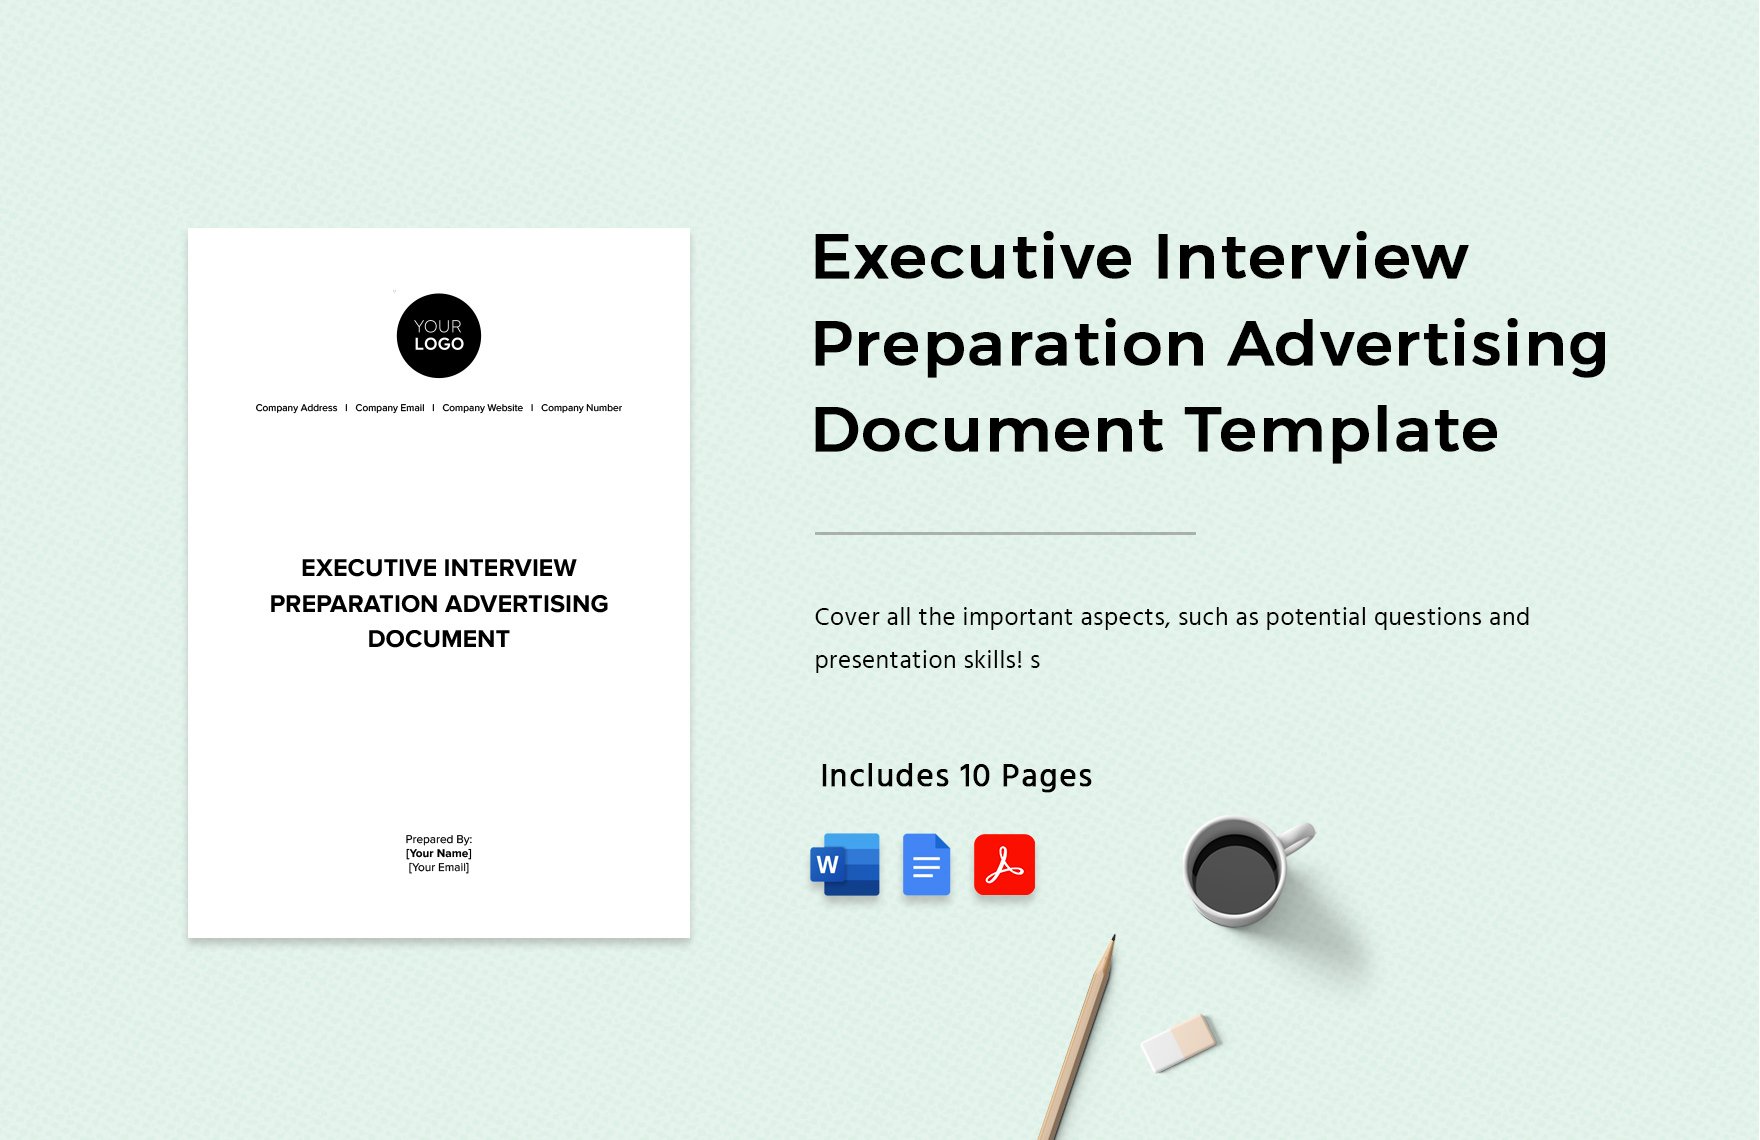 Executive Interview Preparation Advertising Document Template